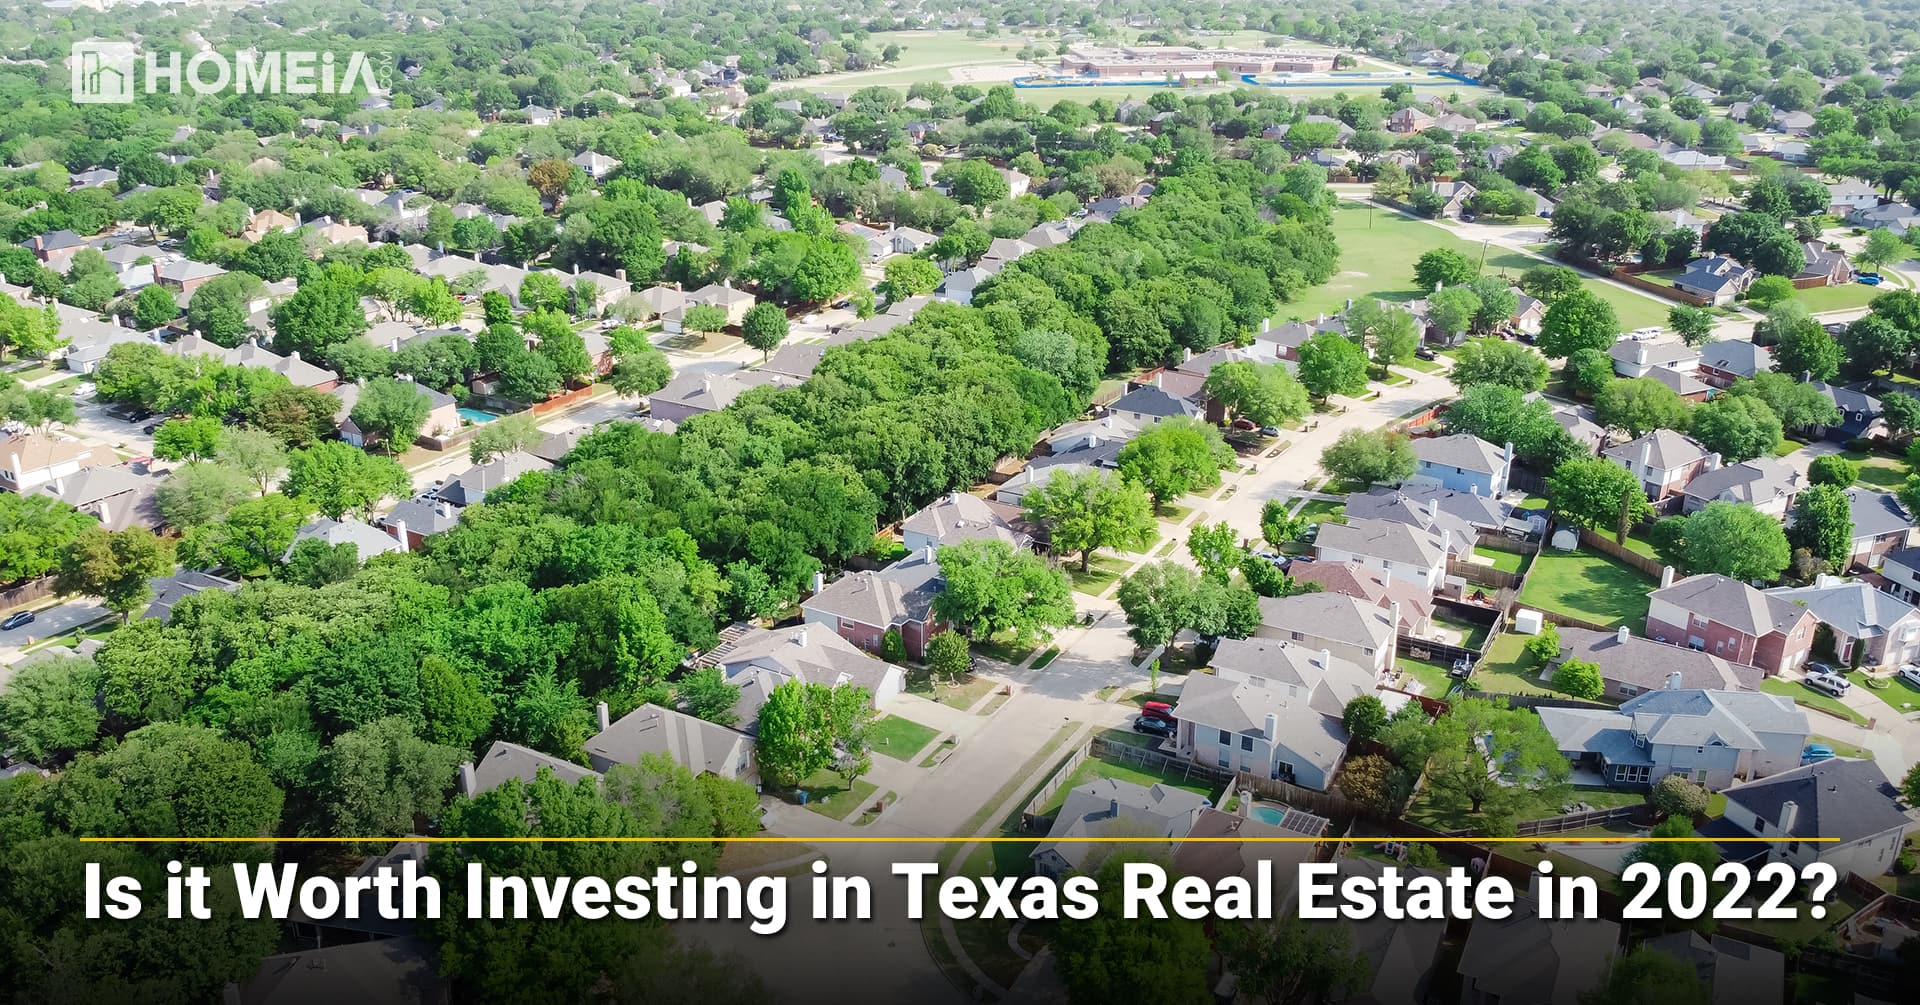 Is it Worth Investing in Texas Real Estate in 2022?